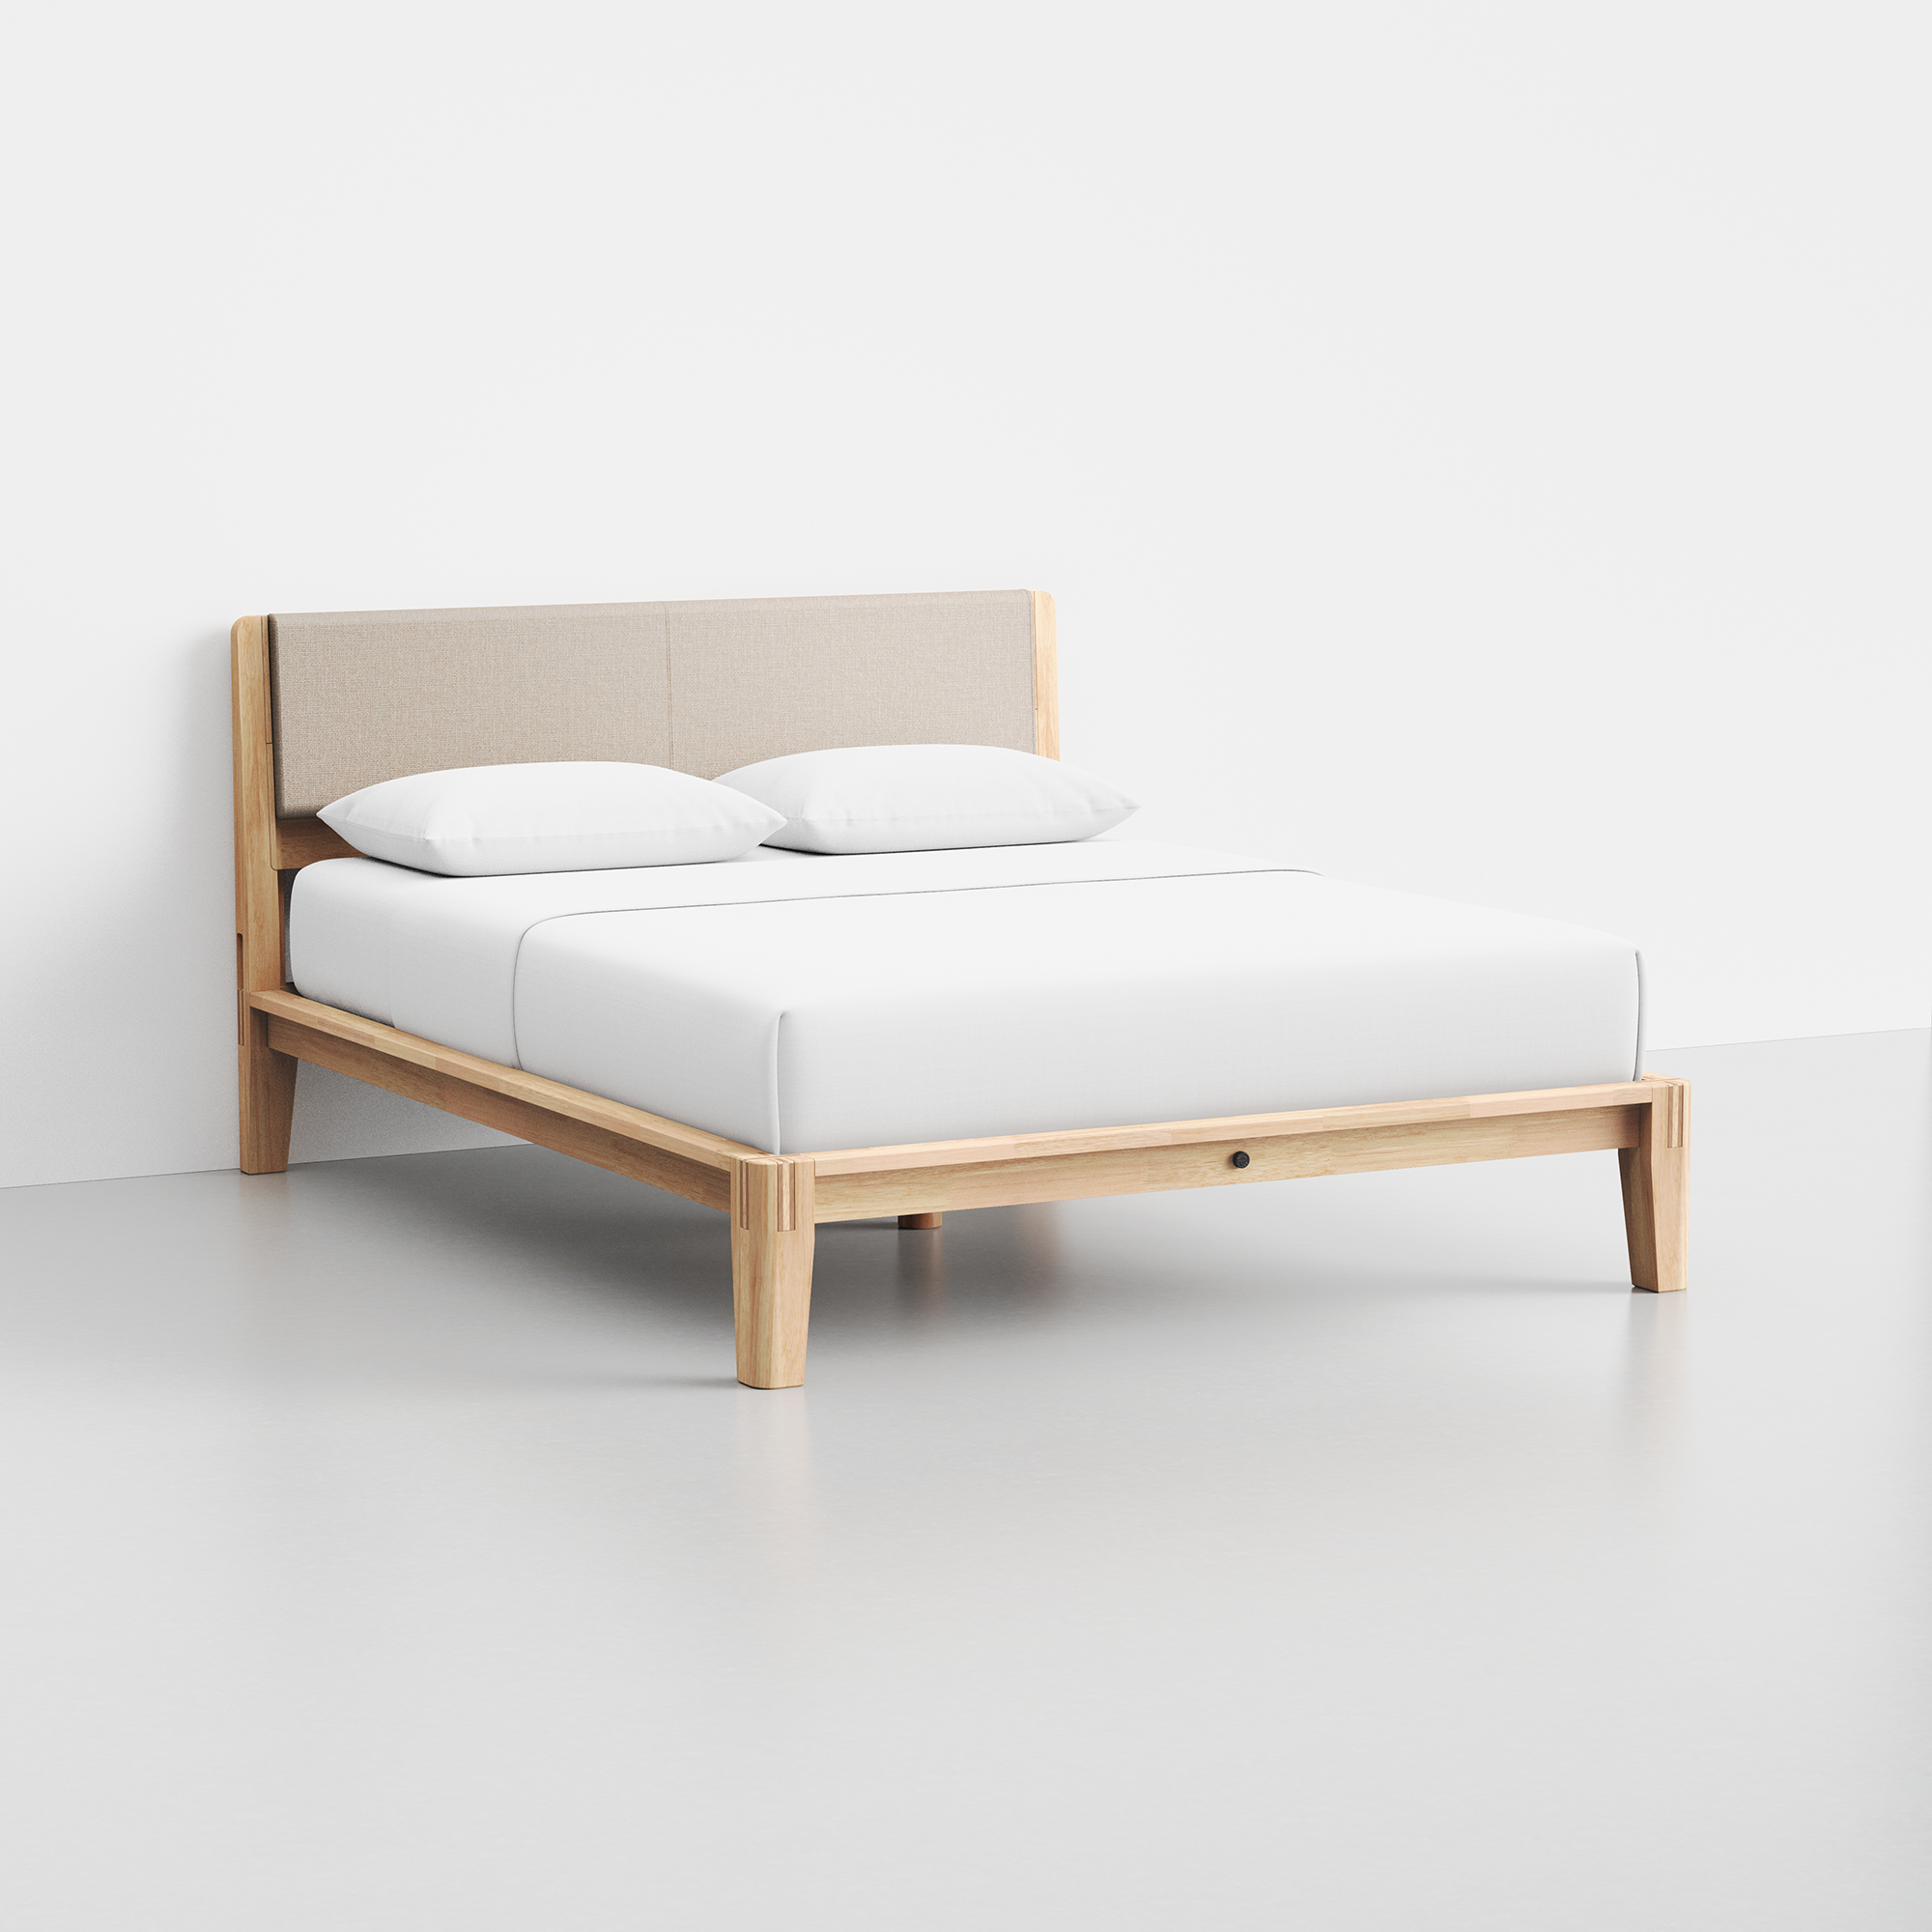 The Bed (Natural / HB Cushion Dune) - Render - Angled